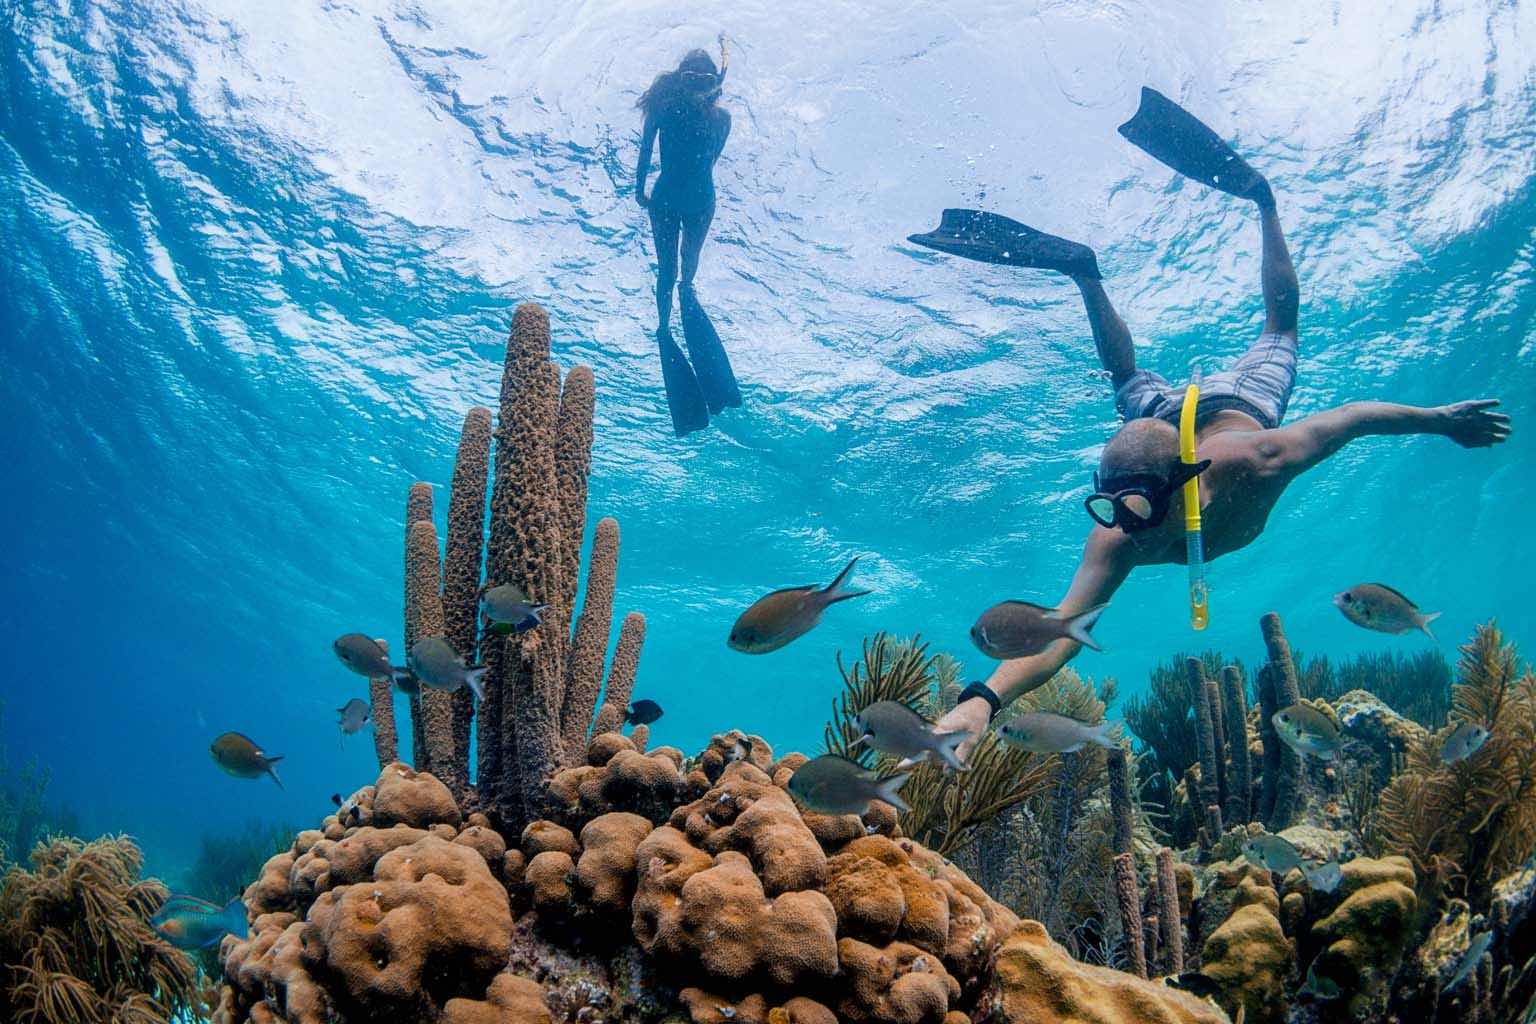 An Image of two persons snorkeling on bonaire showcasing the beautiful underwater scenery.